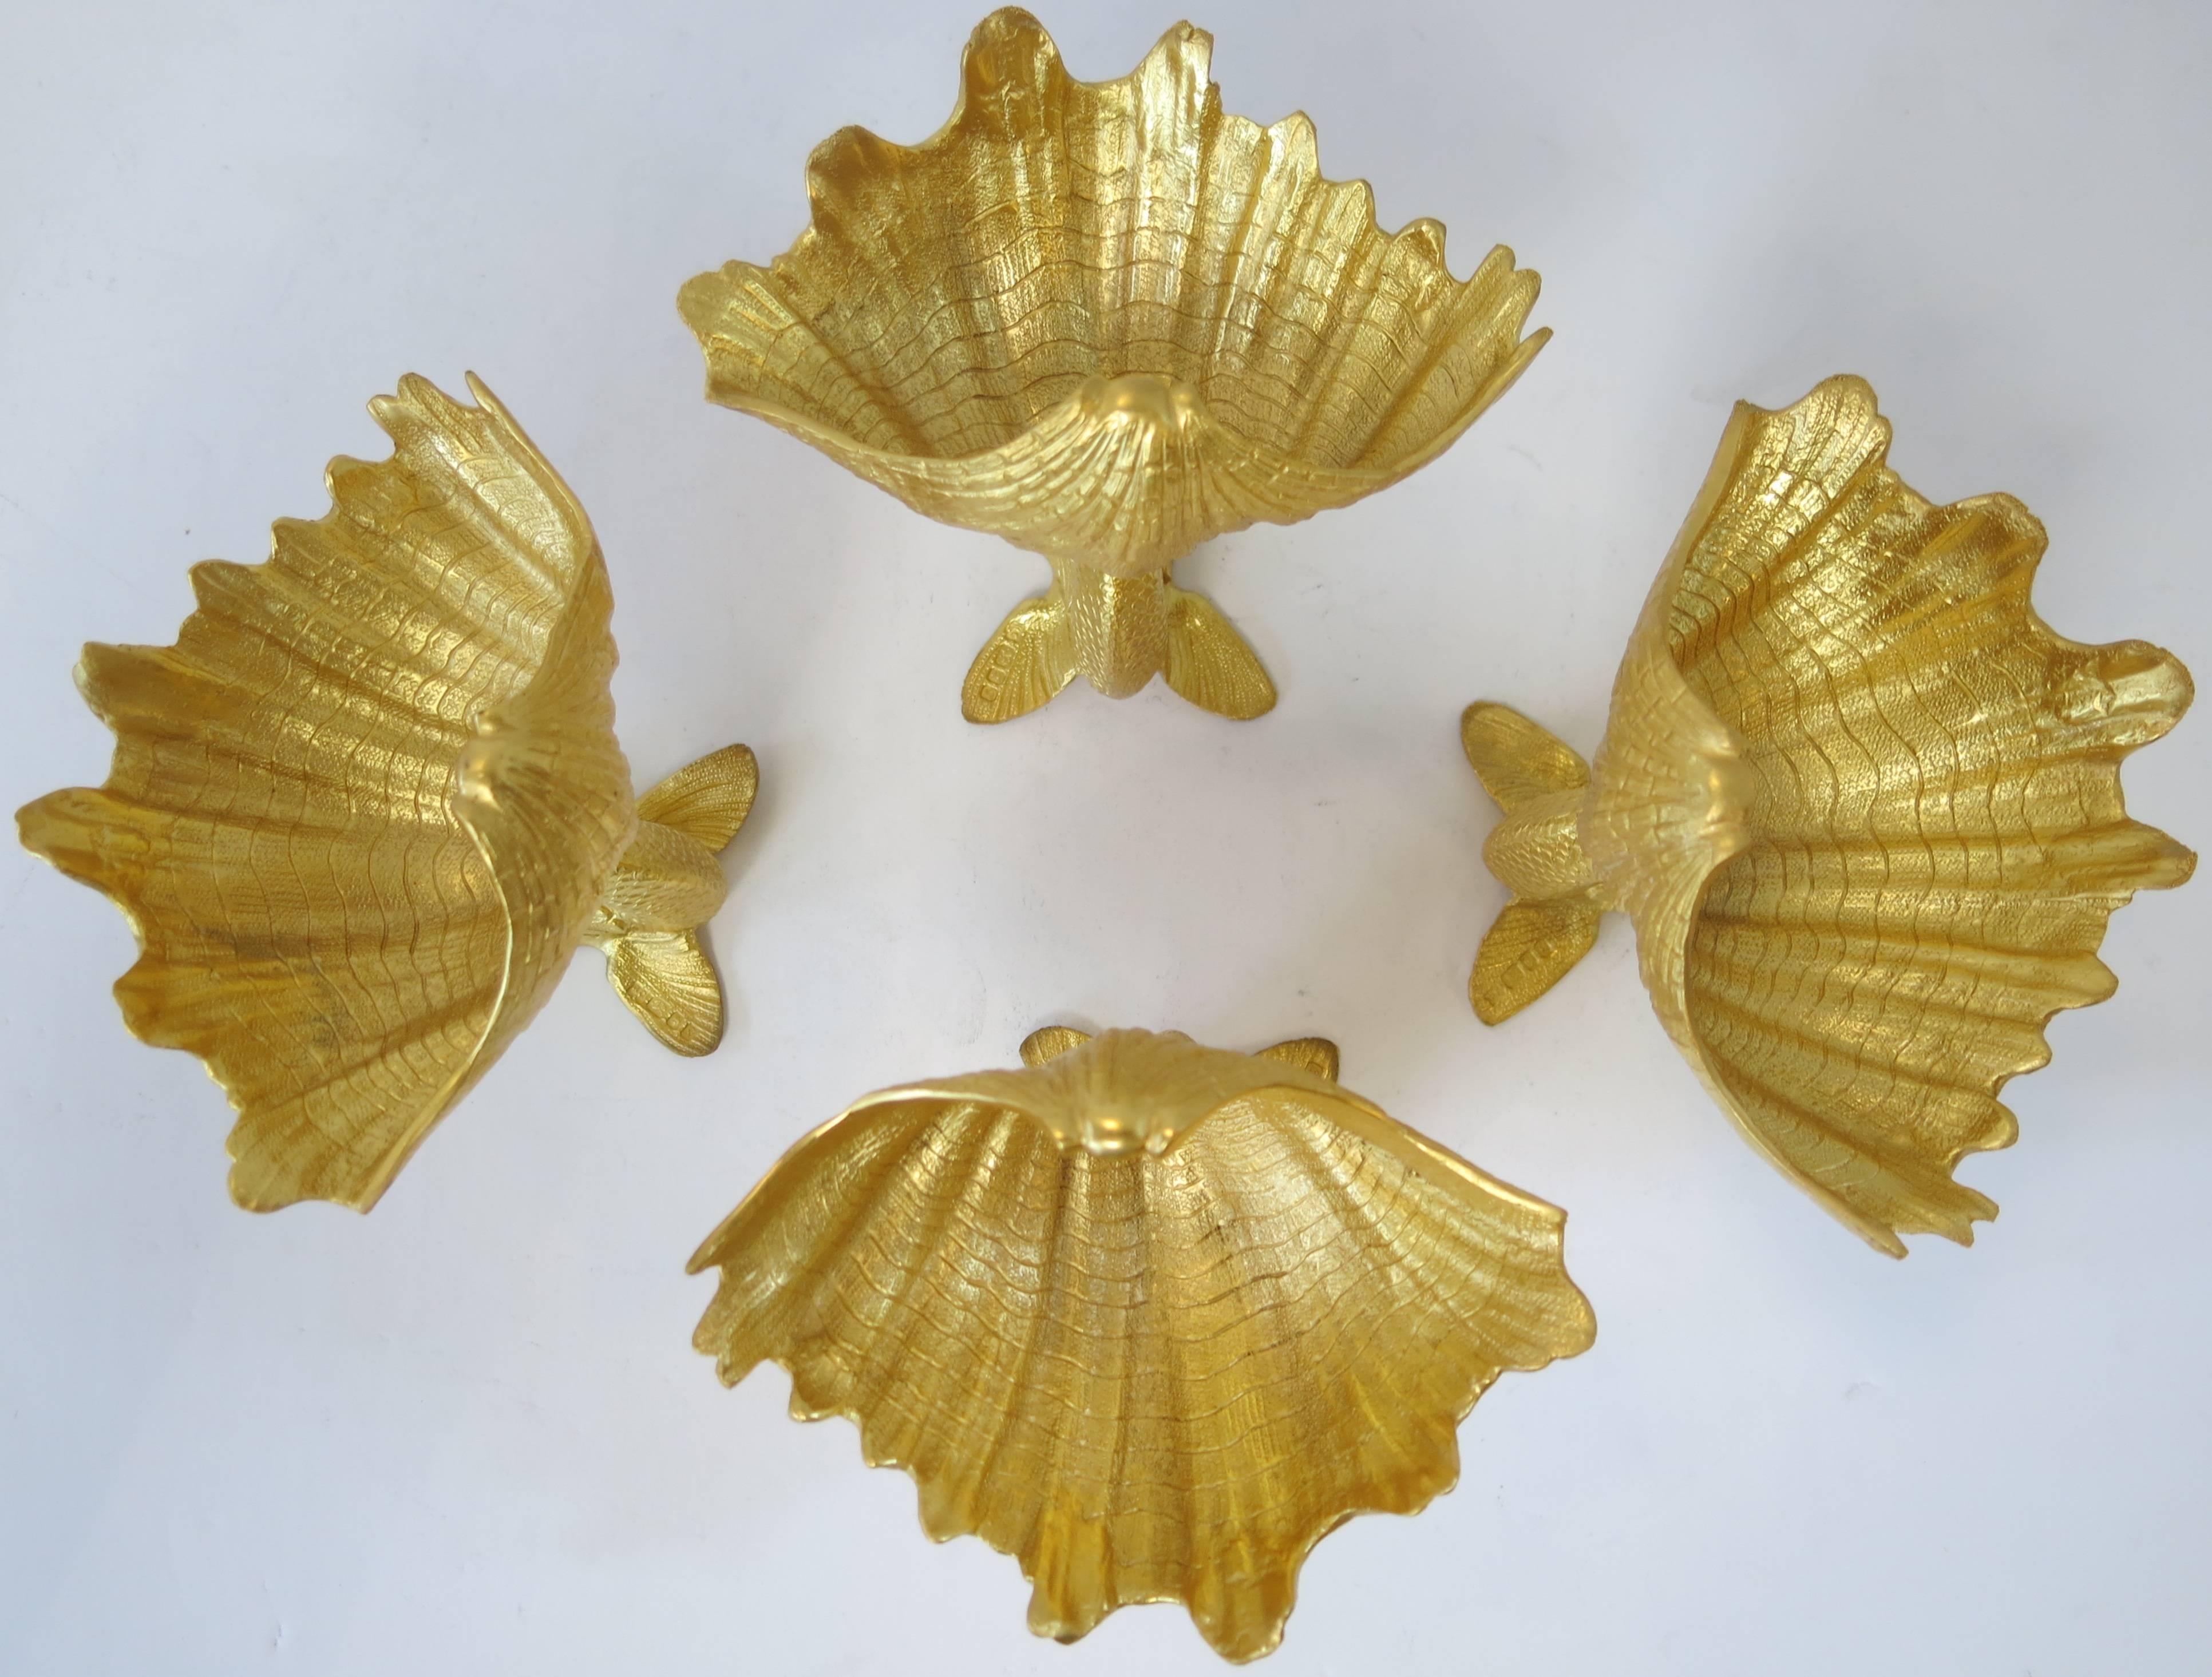 Set of four English, sterling silver gilt, dolphin and shell master salts, made by Richard Comyns, London, 1962. The cast dolphin and shells are beautifully textured and are solid silver.
Each Is Hallmarked. Measure: 4